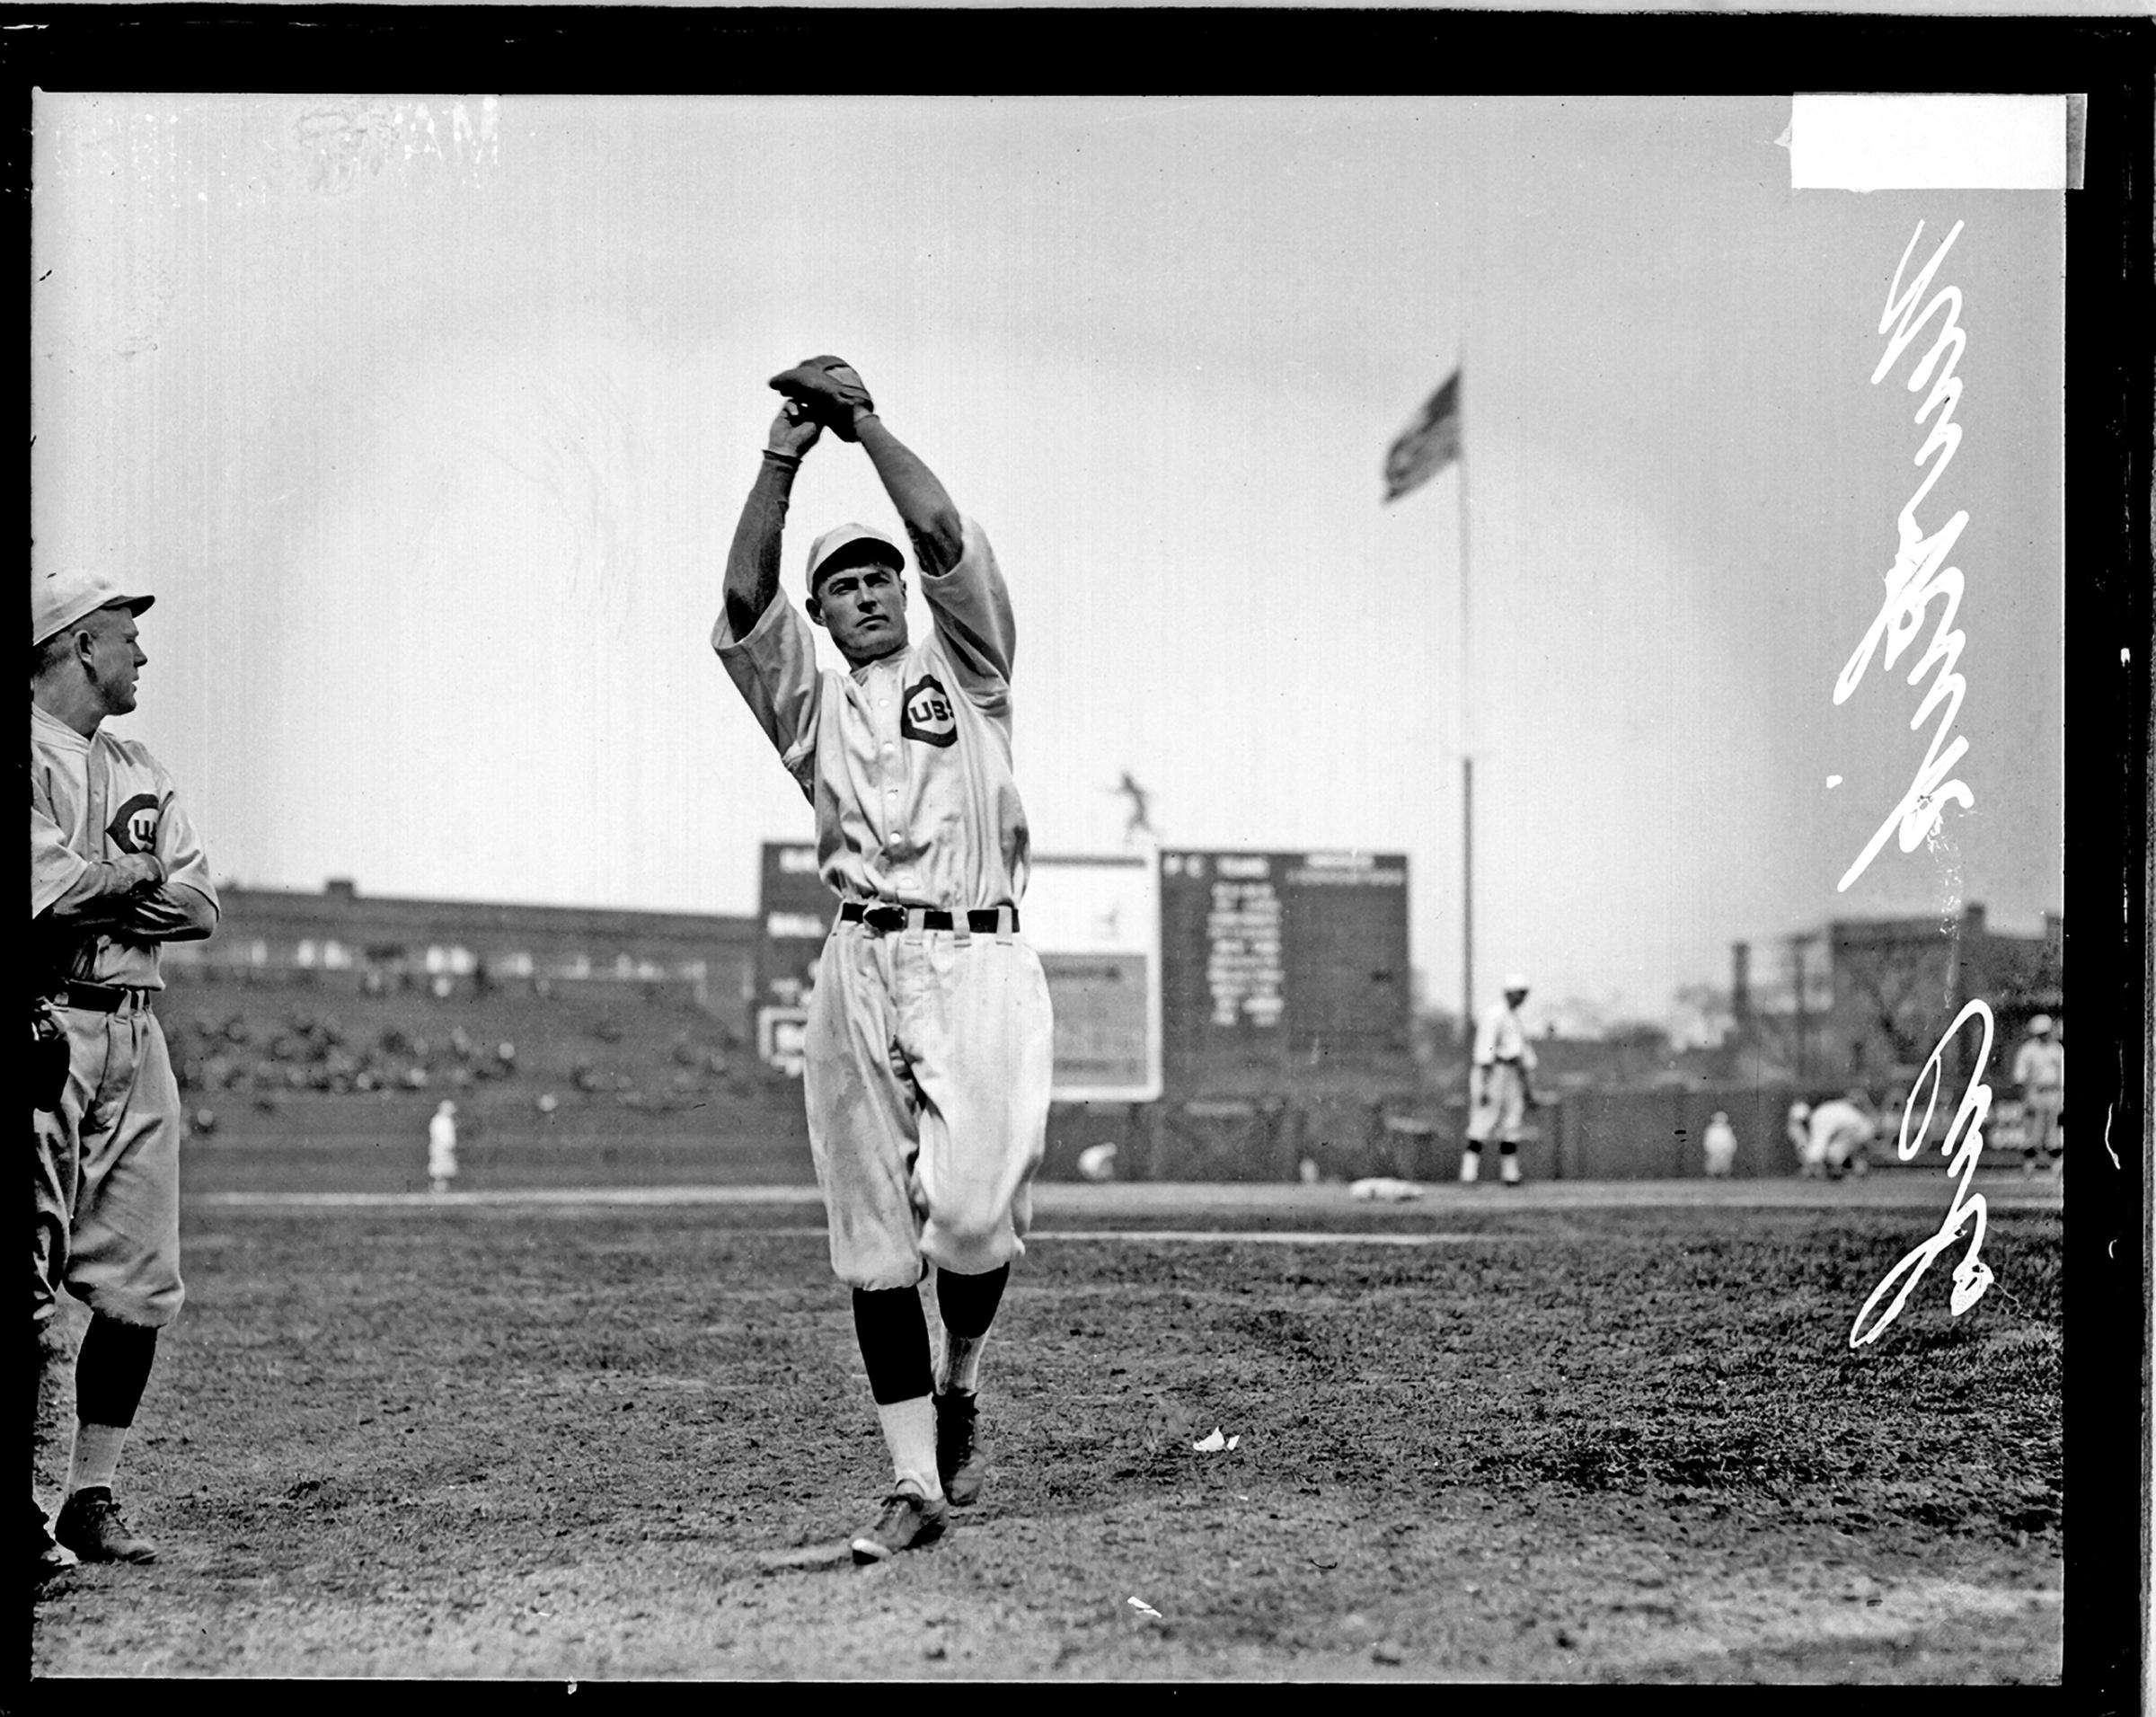 Chicago Cubs Player Newkirk in 1920